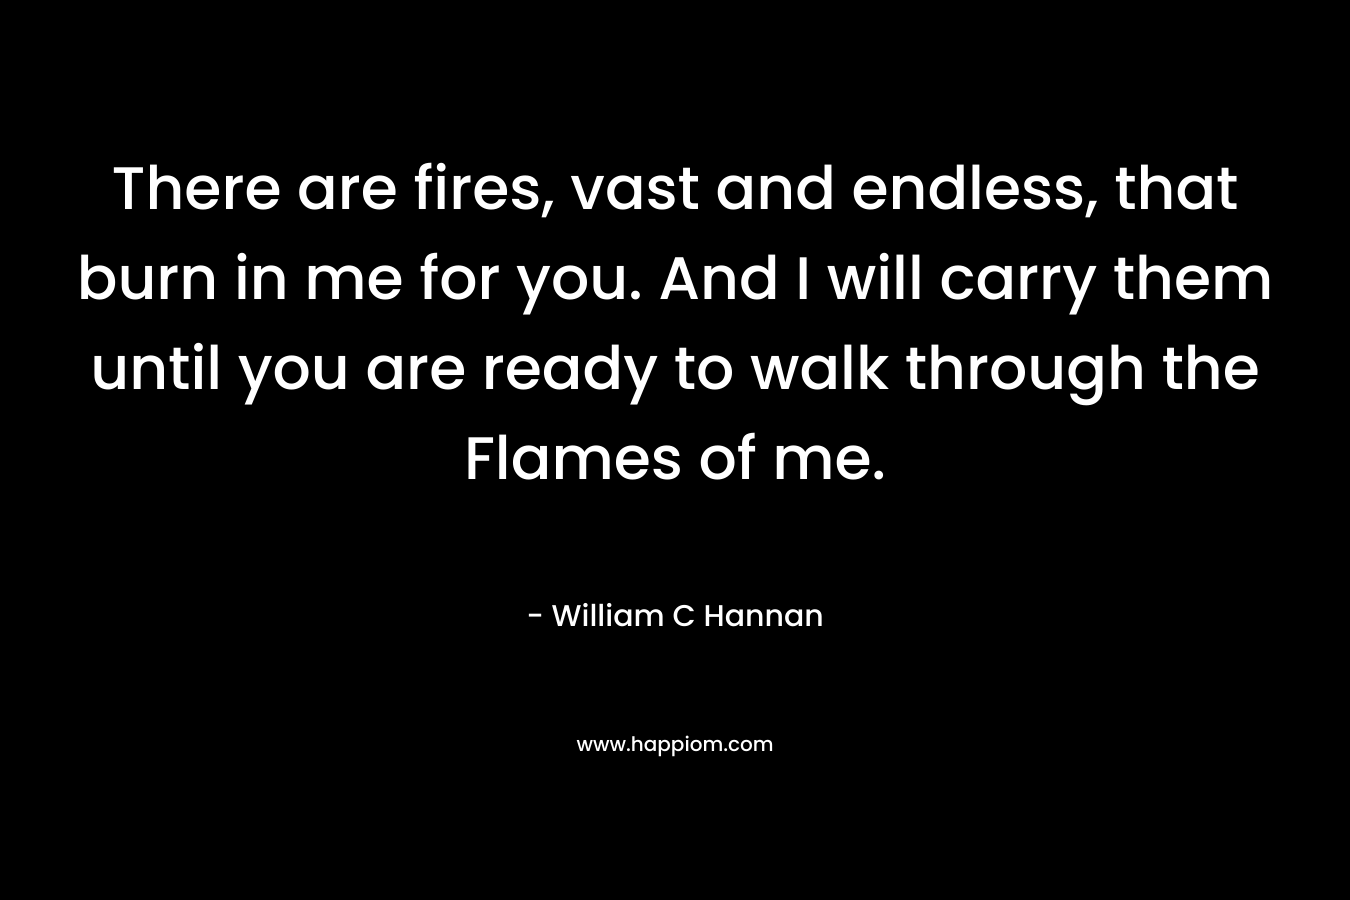 There are fires, vast and endless, that burn in me for you. And I will carry them until you are ready to walk through the Flames of me. – William C Hannan